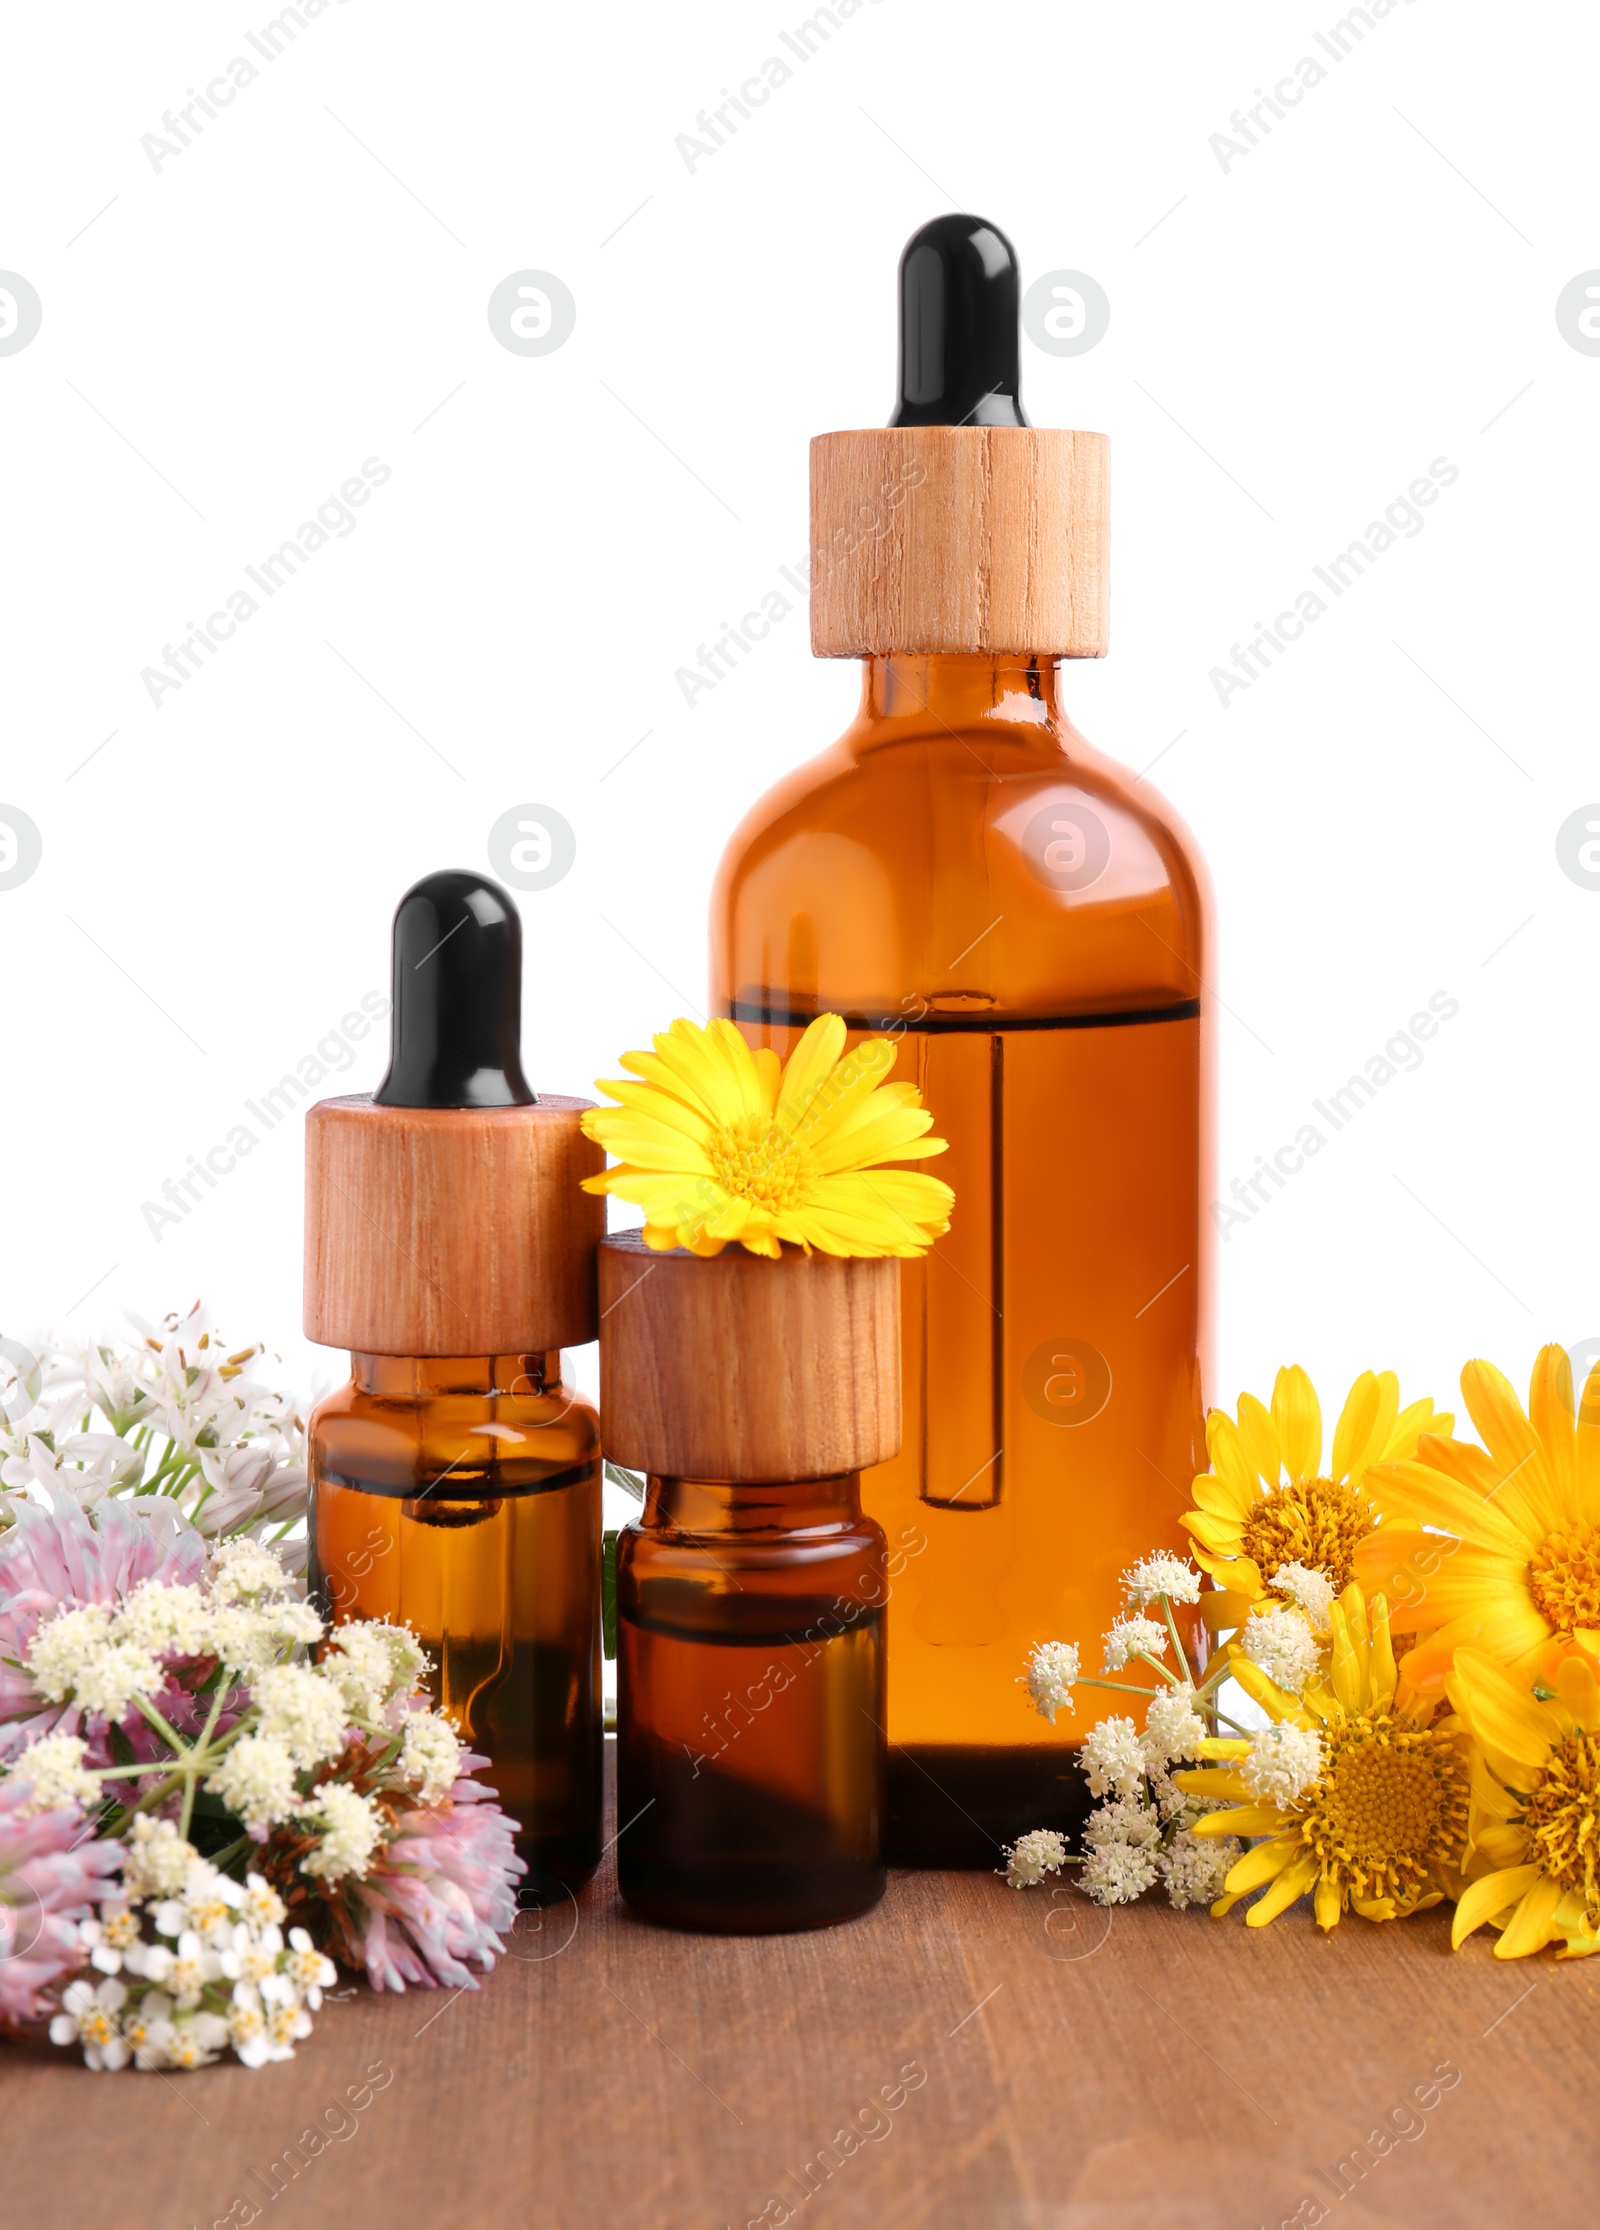 Photo of Bottles of essential oils and different wildflowers on wooden table against white background